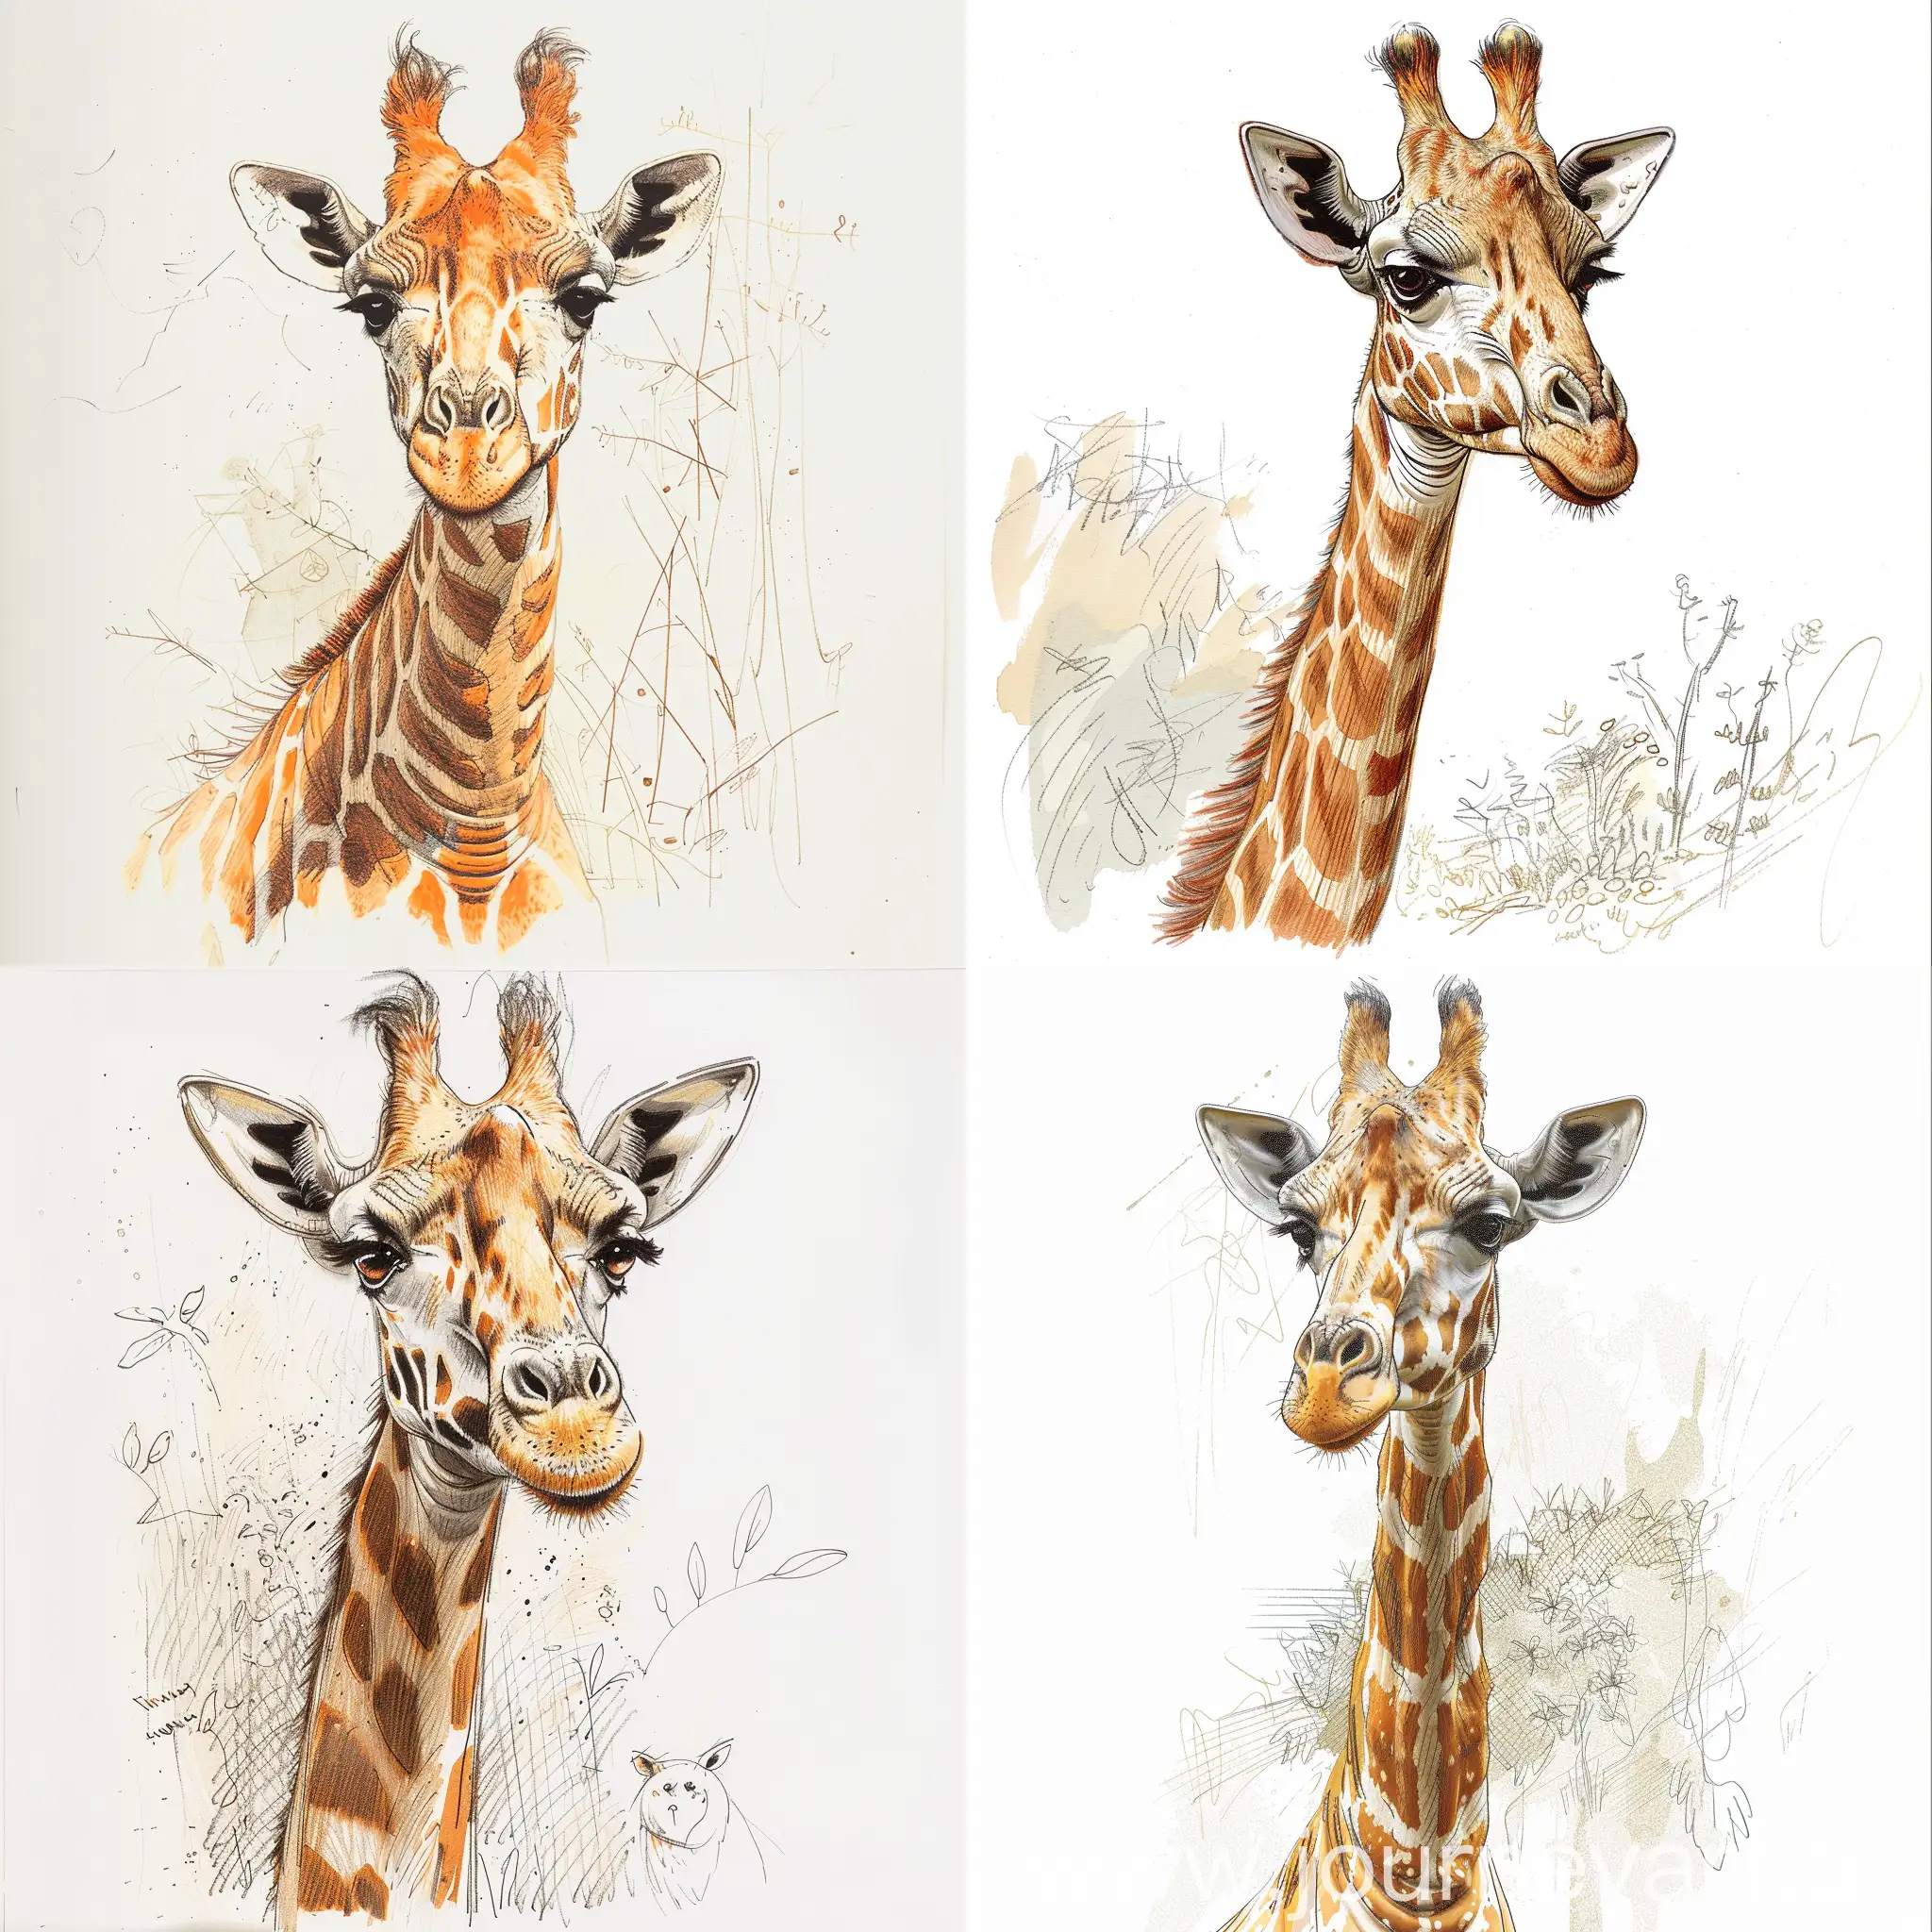 VintageStyle-Giraffe-Illustration-with-Whimsical-Charm